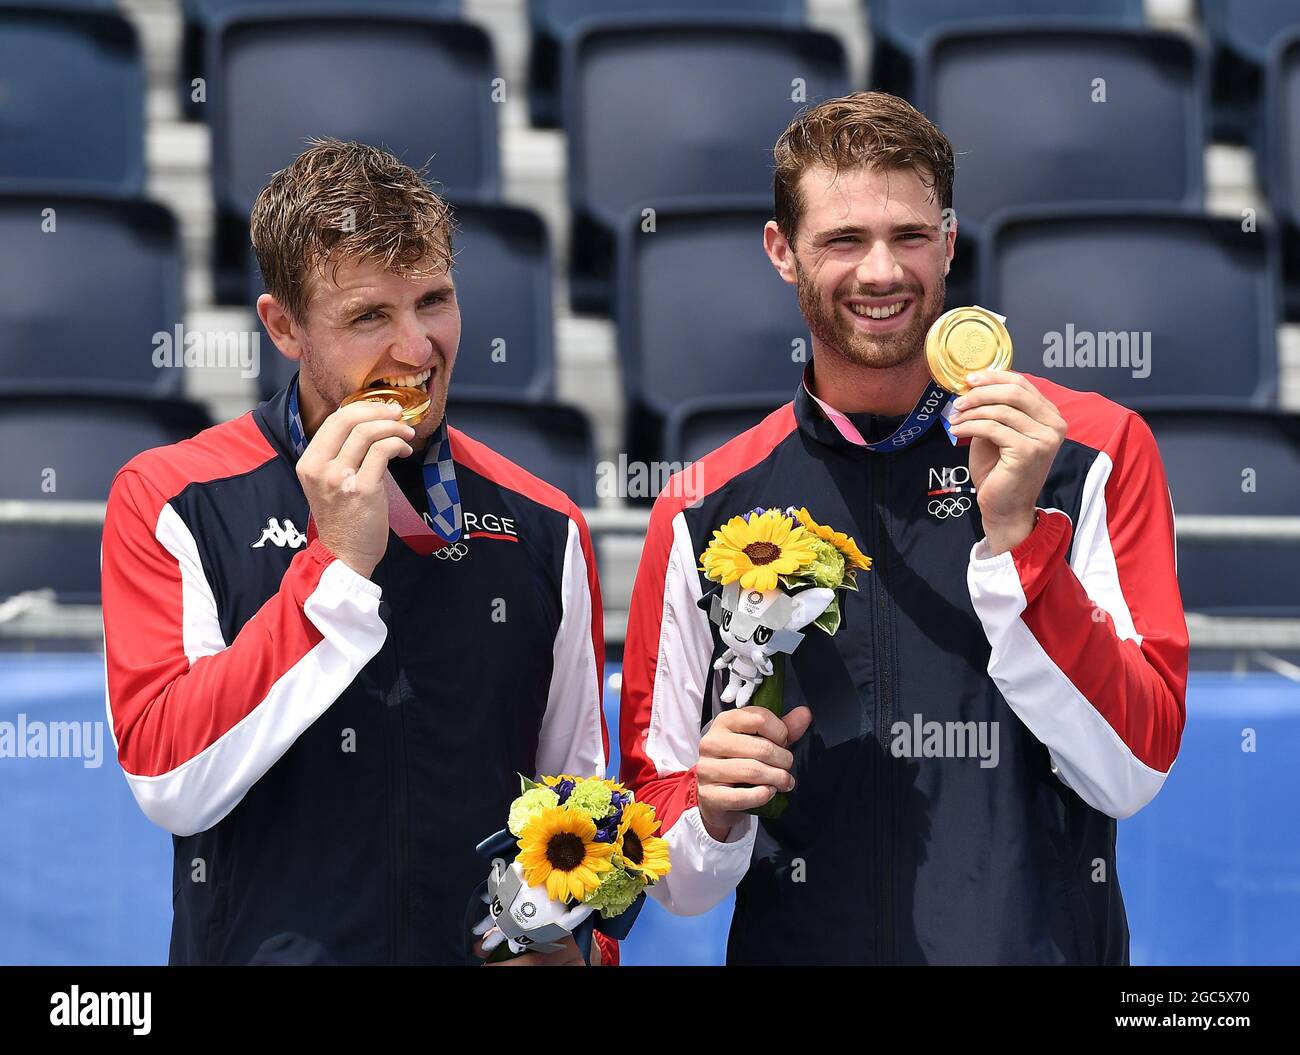 Tokyo, Japan. 7th Aug, 2021. Gold medalists Norway's Anders Berntsen Mol (R)/Christian Sandlie Sorum celebrate during the awarding ceremony for the men's beach volleyball event at the Tokyo 2020 Olympic Games in Tokyo, Japan, Aug. 7, 2021. Credit: Li He/Xinhua/Alamy Live News Stock Photo